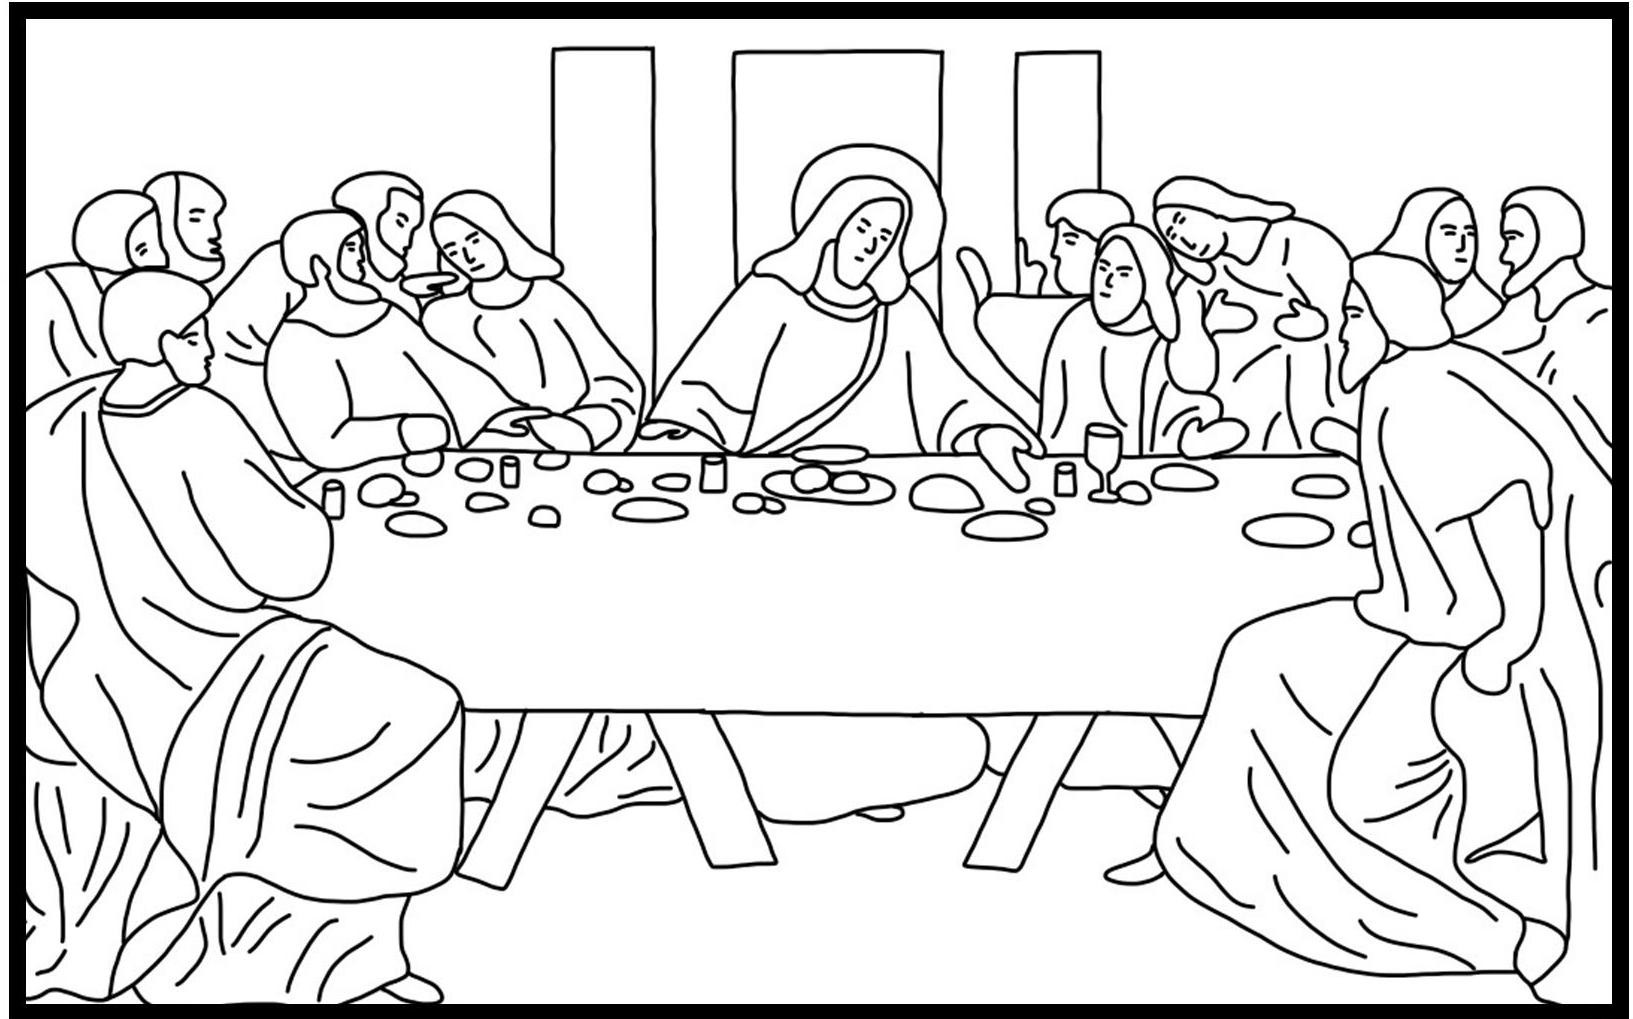 The Last Supper Coloring Pages Printable
 Lent Coloring Pages Best Coloring Pages For Kids